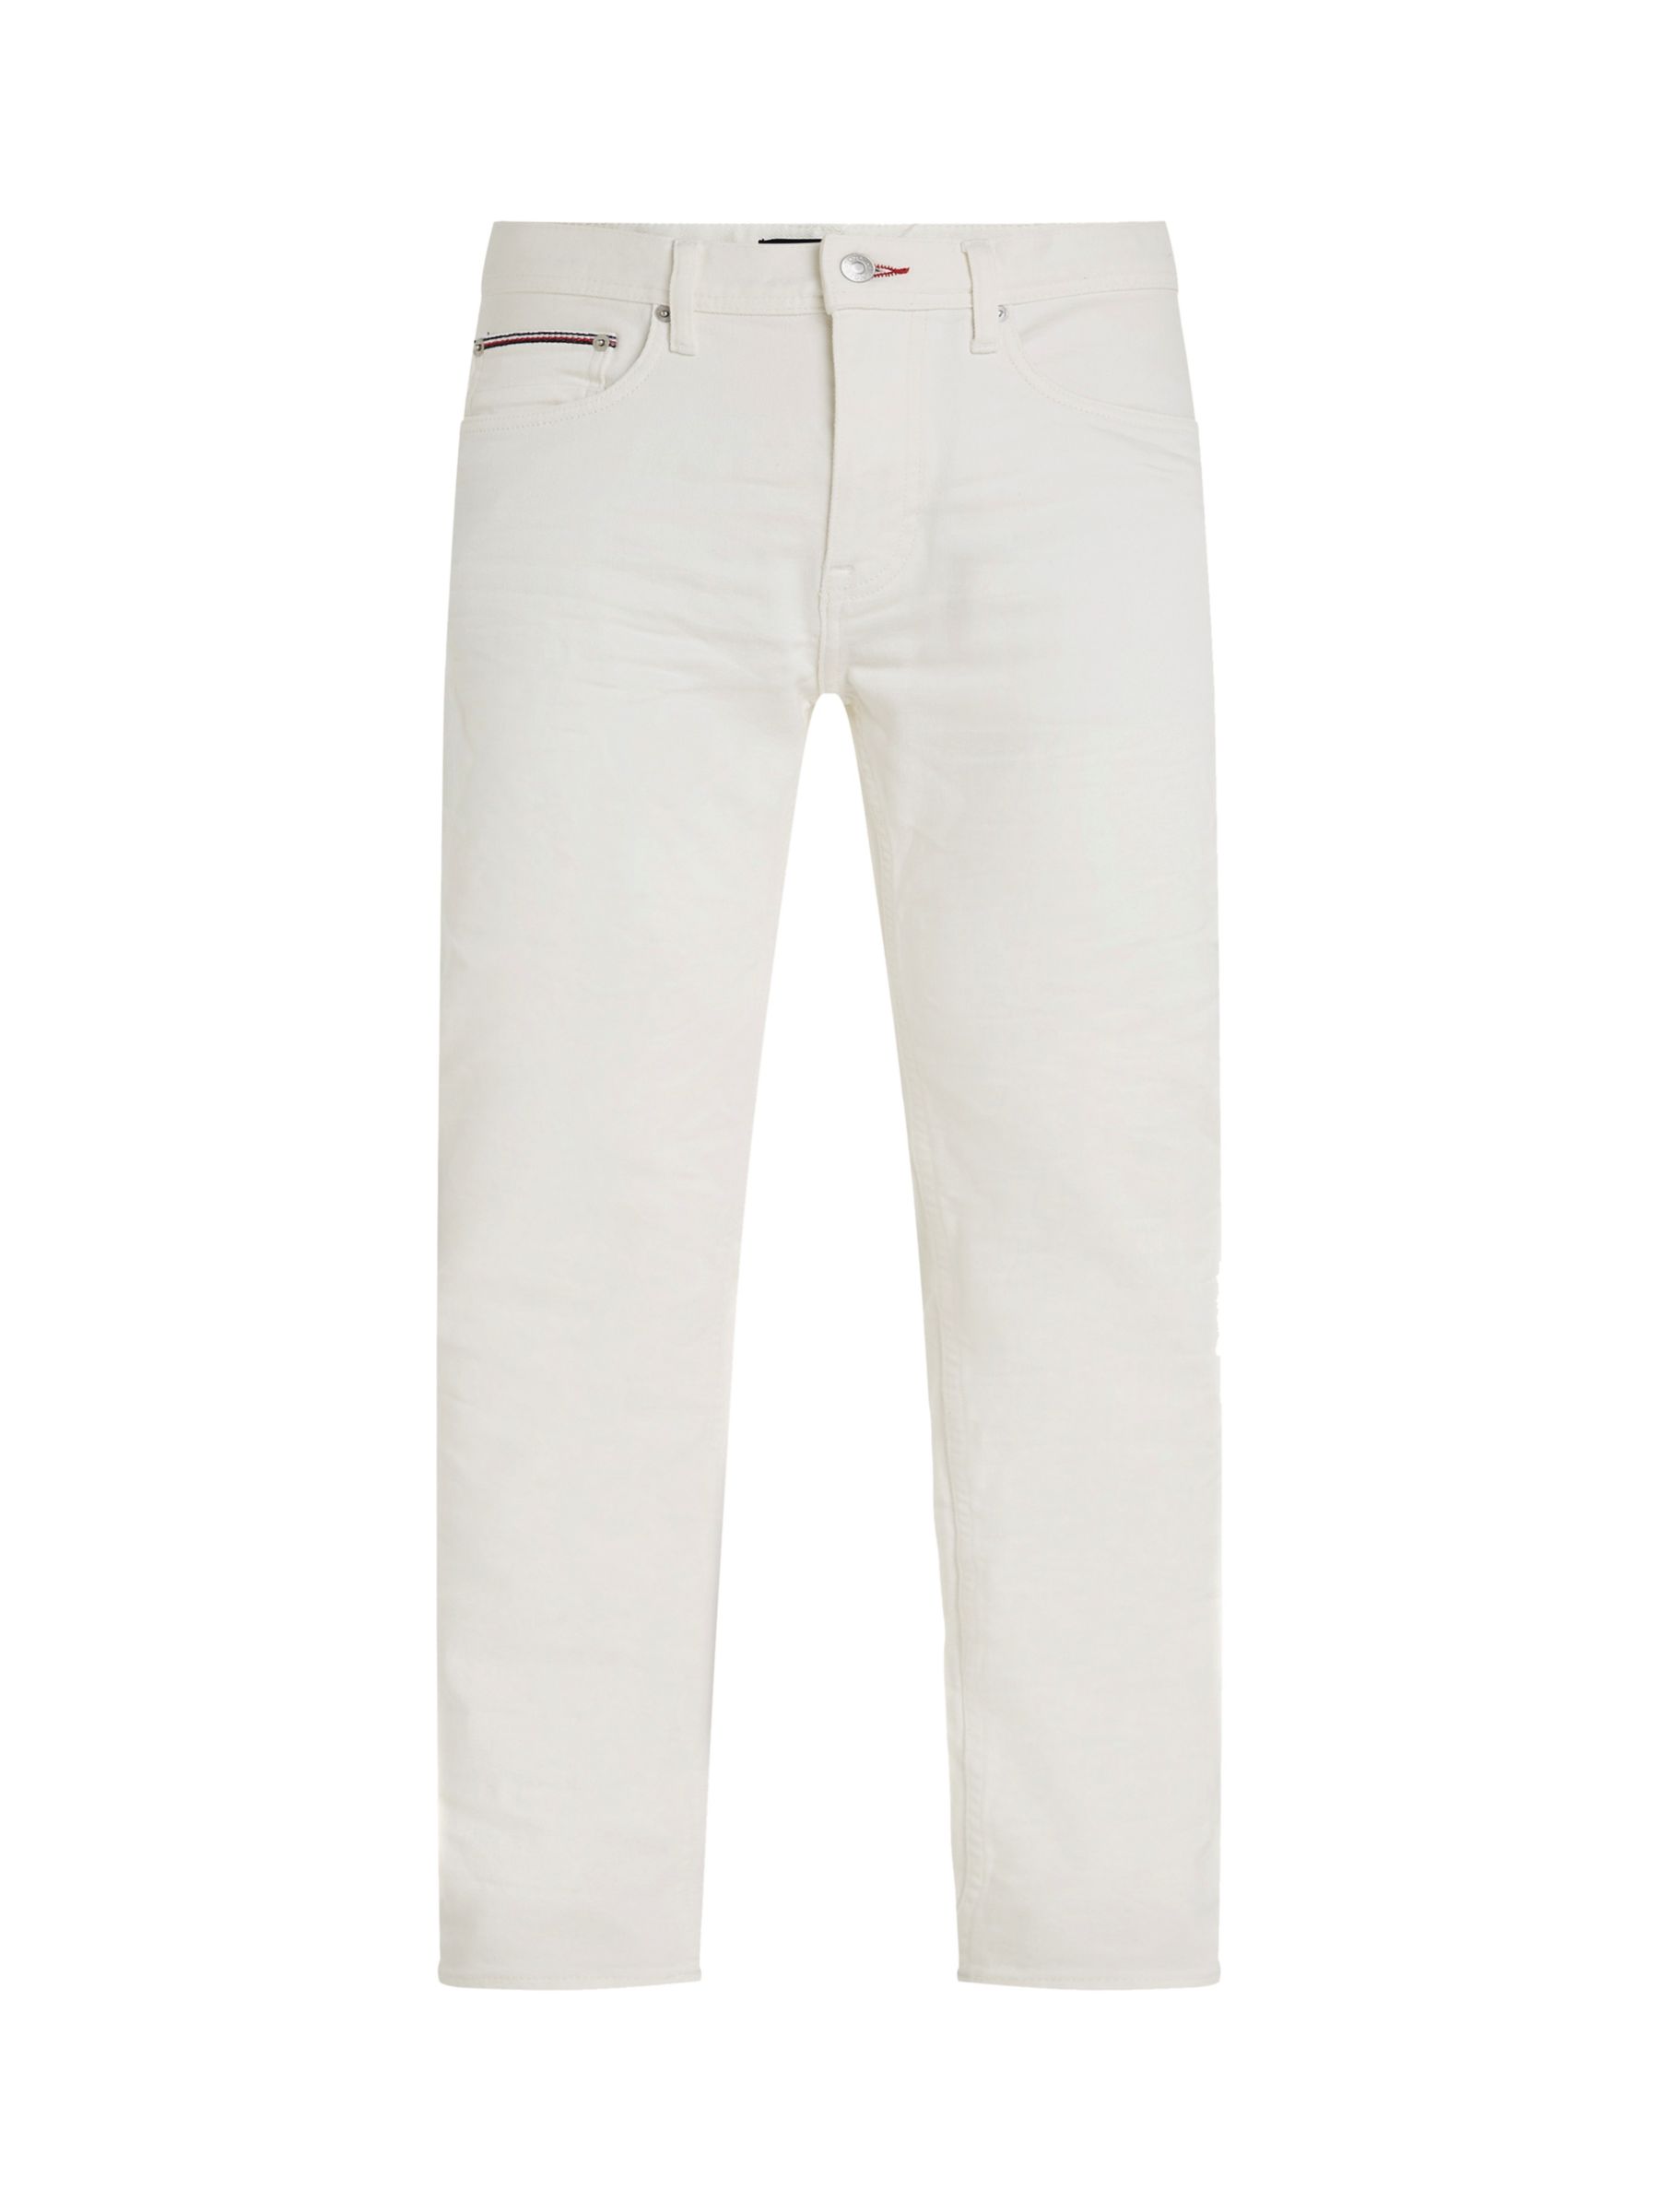 Tommy Hilfiger Denton Straight Jeans, Gale White at John Lewis & Partners